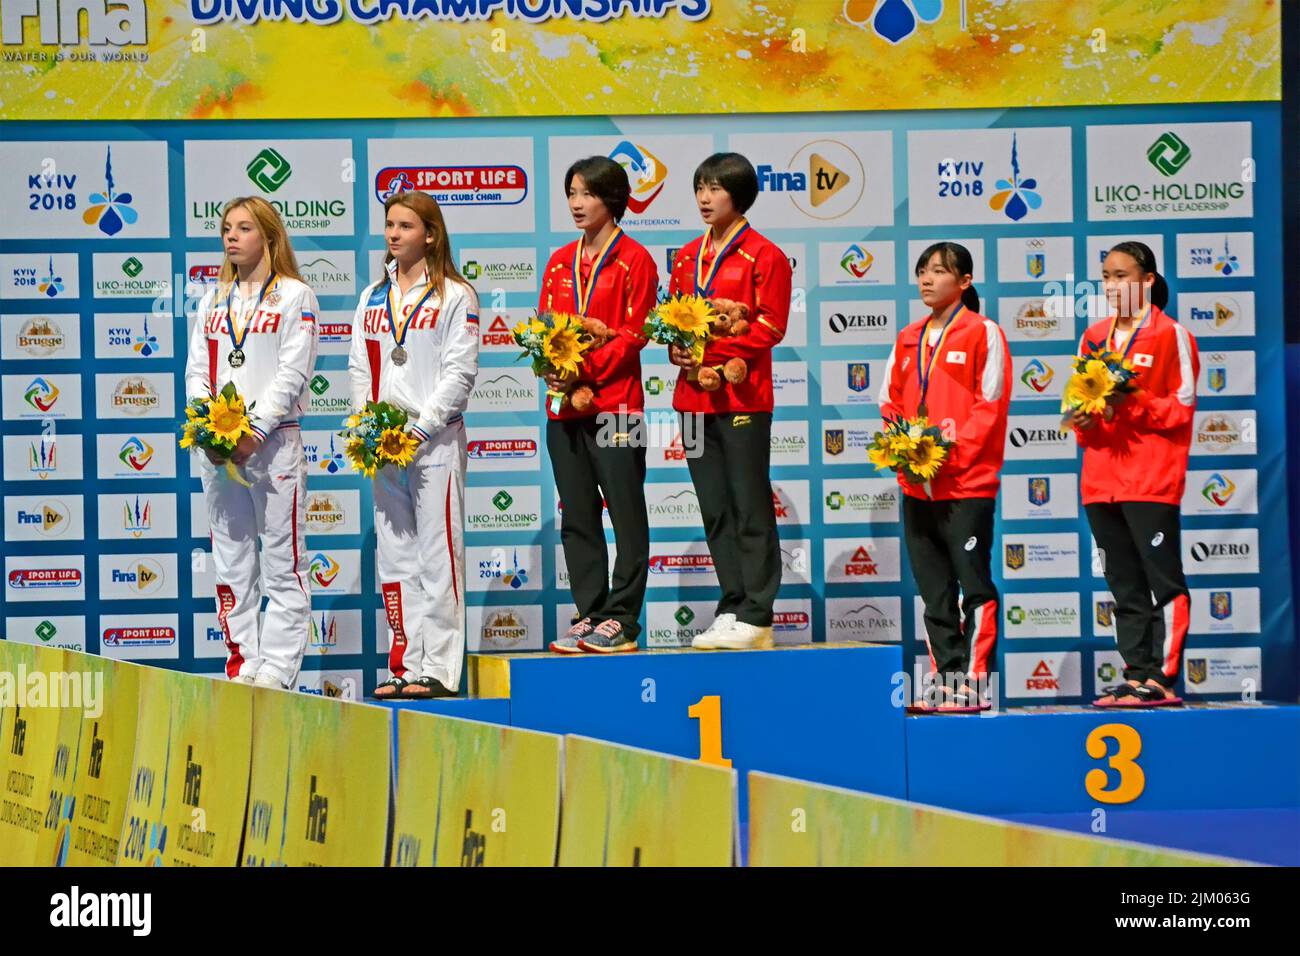 Winner ceremony during 22nd FINA World Junior Diving Championships (FINA Diving Youth Olympic Games Qualification Tournament) in Kiev, Ukraine. Stock Photo